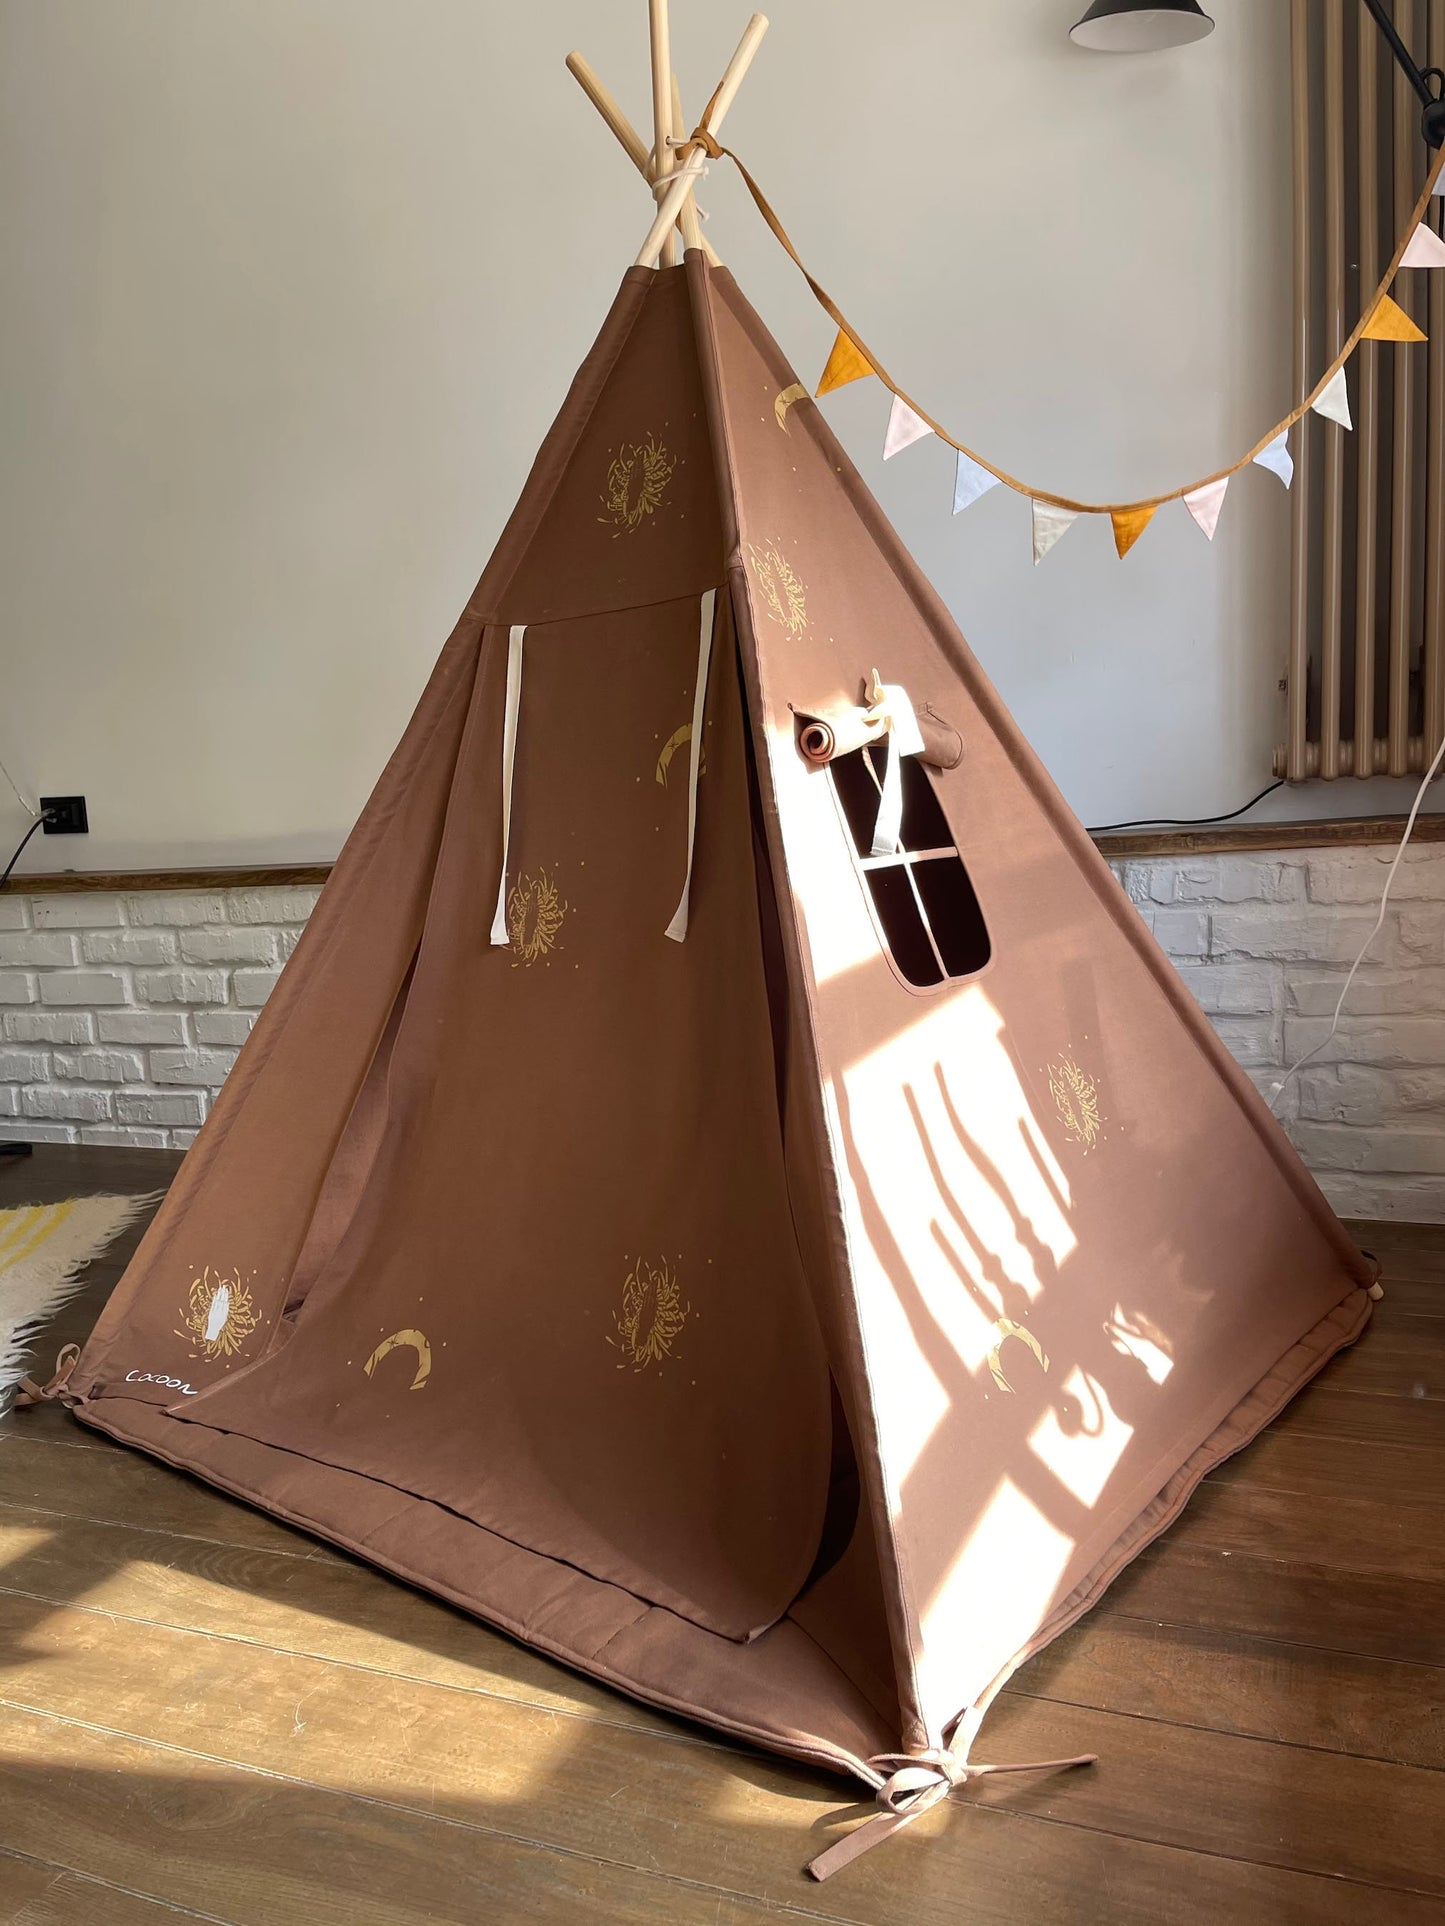 Playhouse For Girls, Portable Tent For Kids Small Indoor Playhouse, Girls Teepee For 4 Year Old,Tent Playhouse For Toddlers